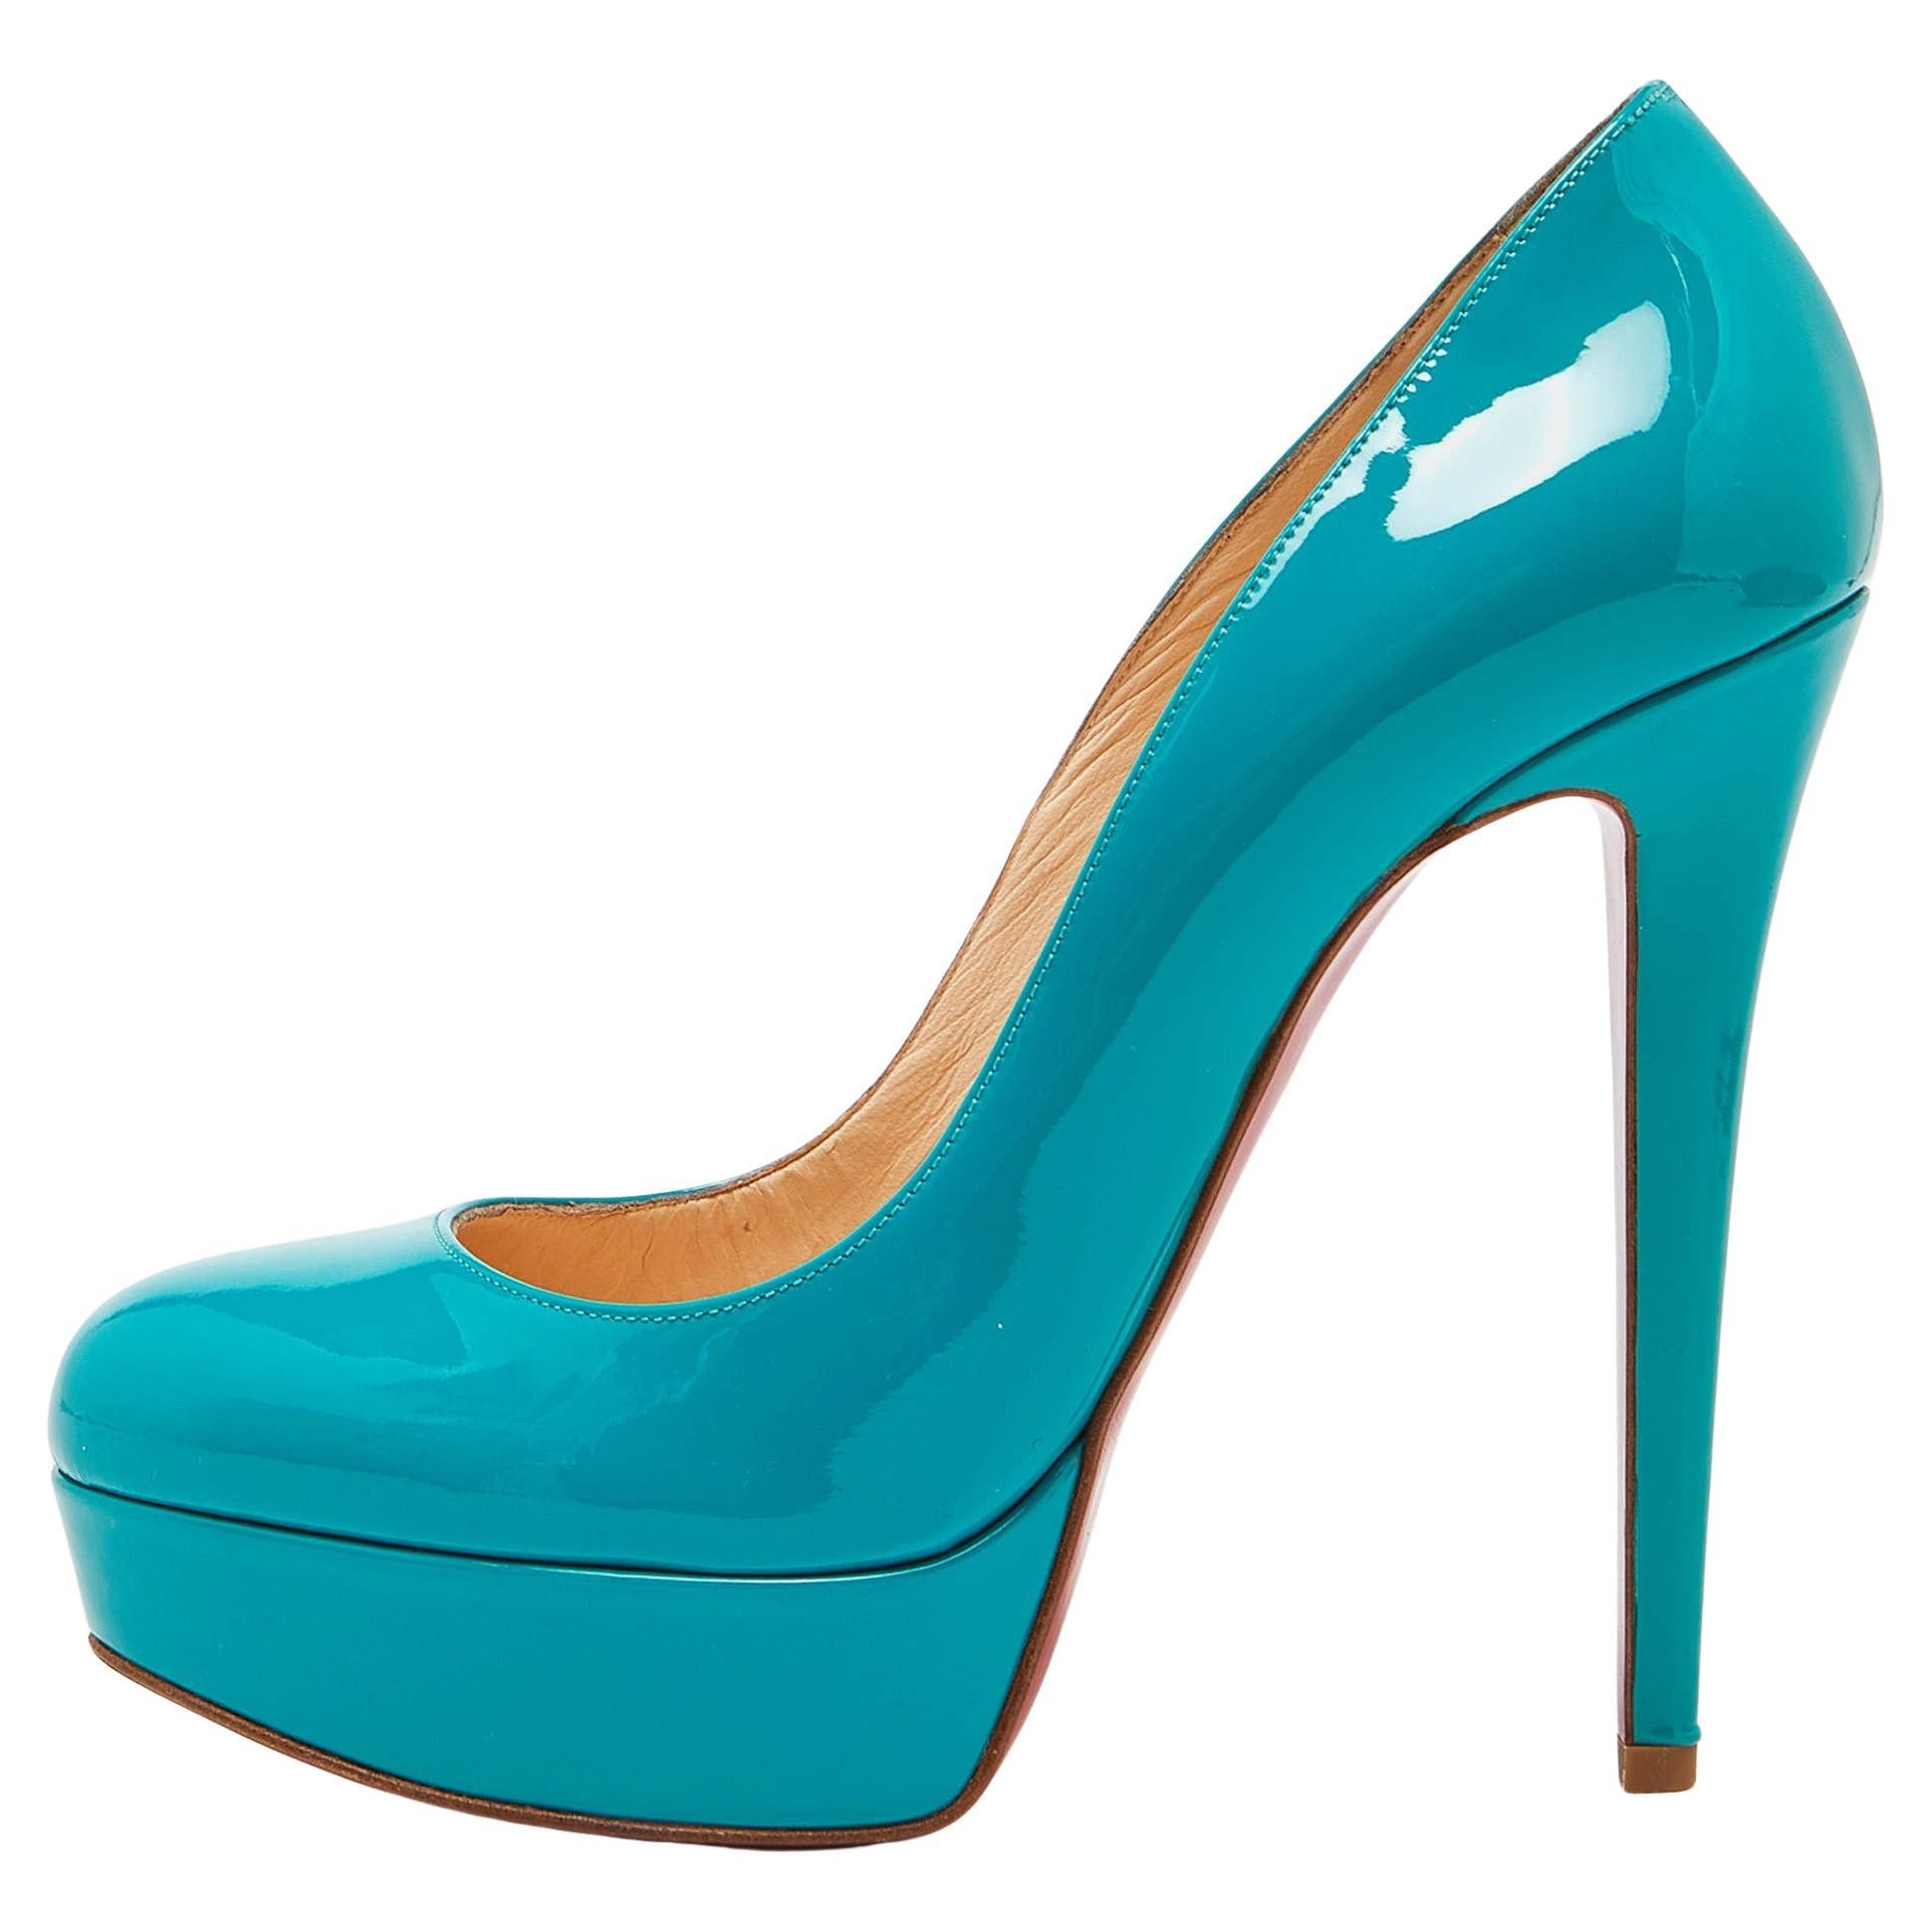 Christian Louboutin Green Patent Leather Bianca Platform Pumps Size 38 For Sale